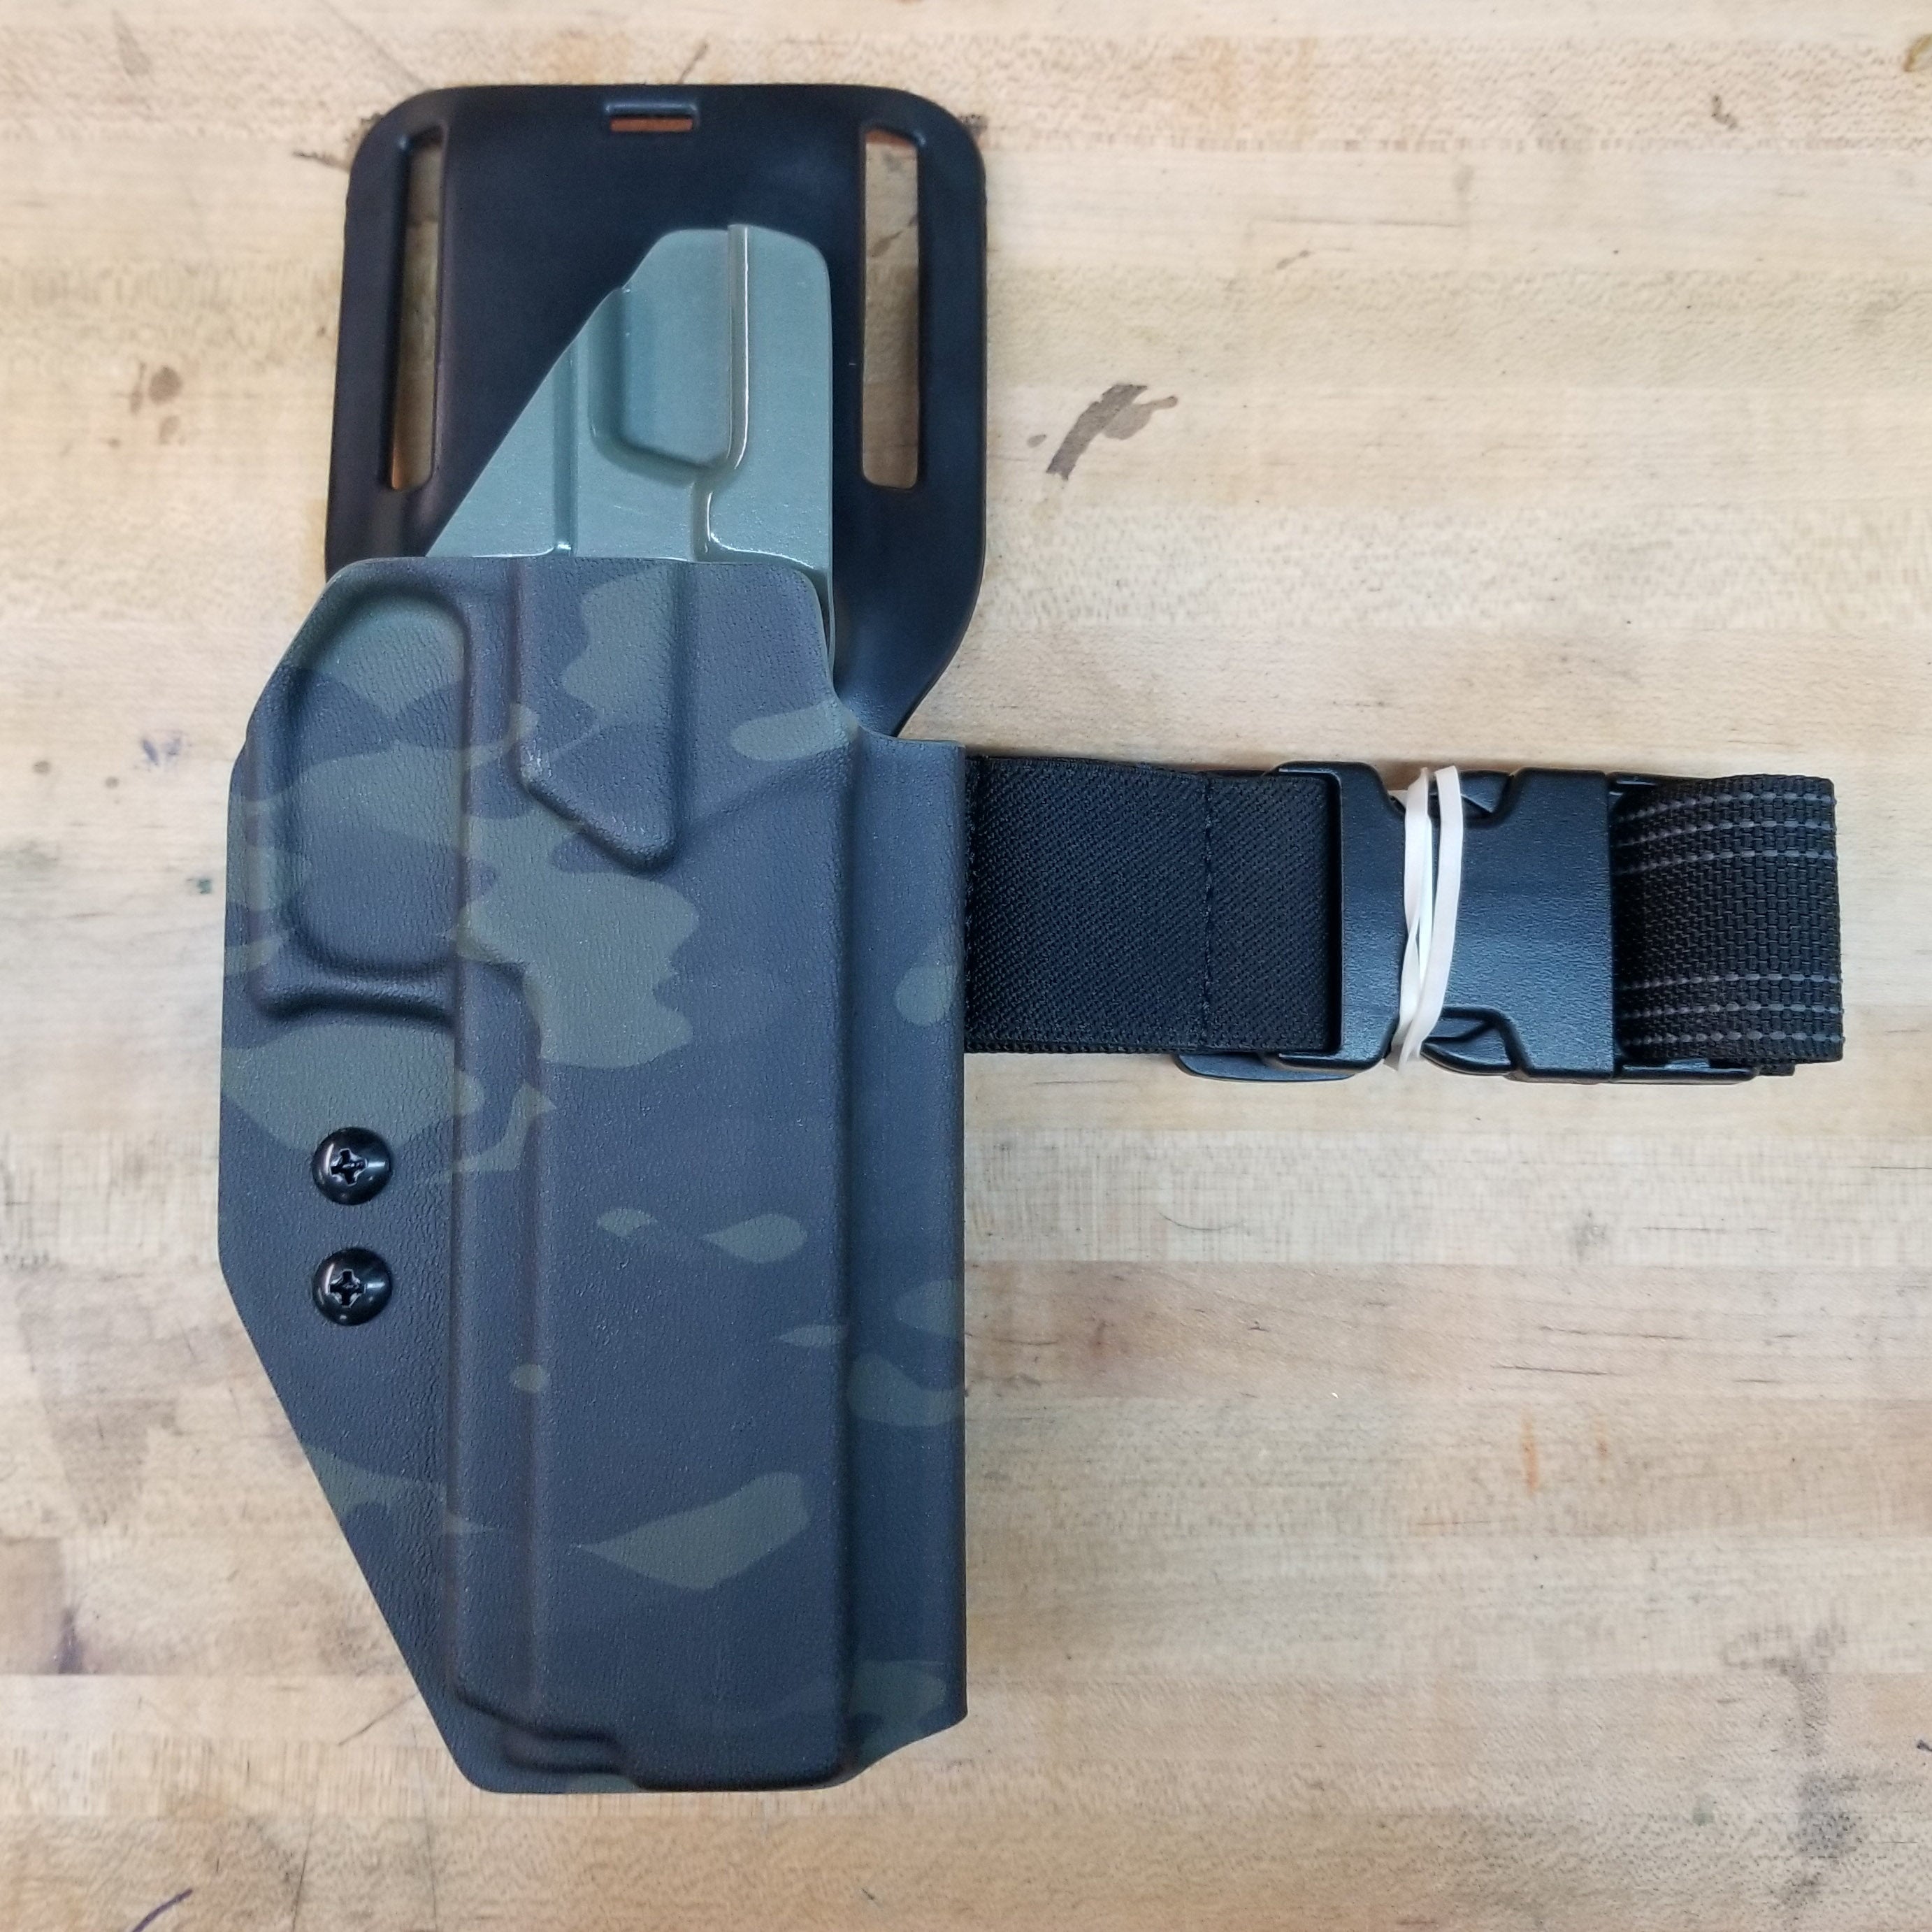 Sig P320 X5 Competition Holster